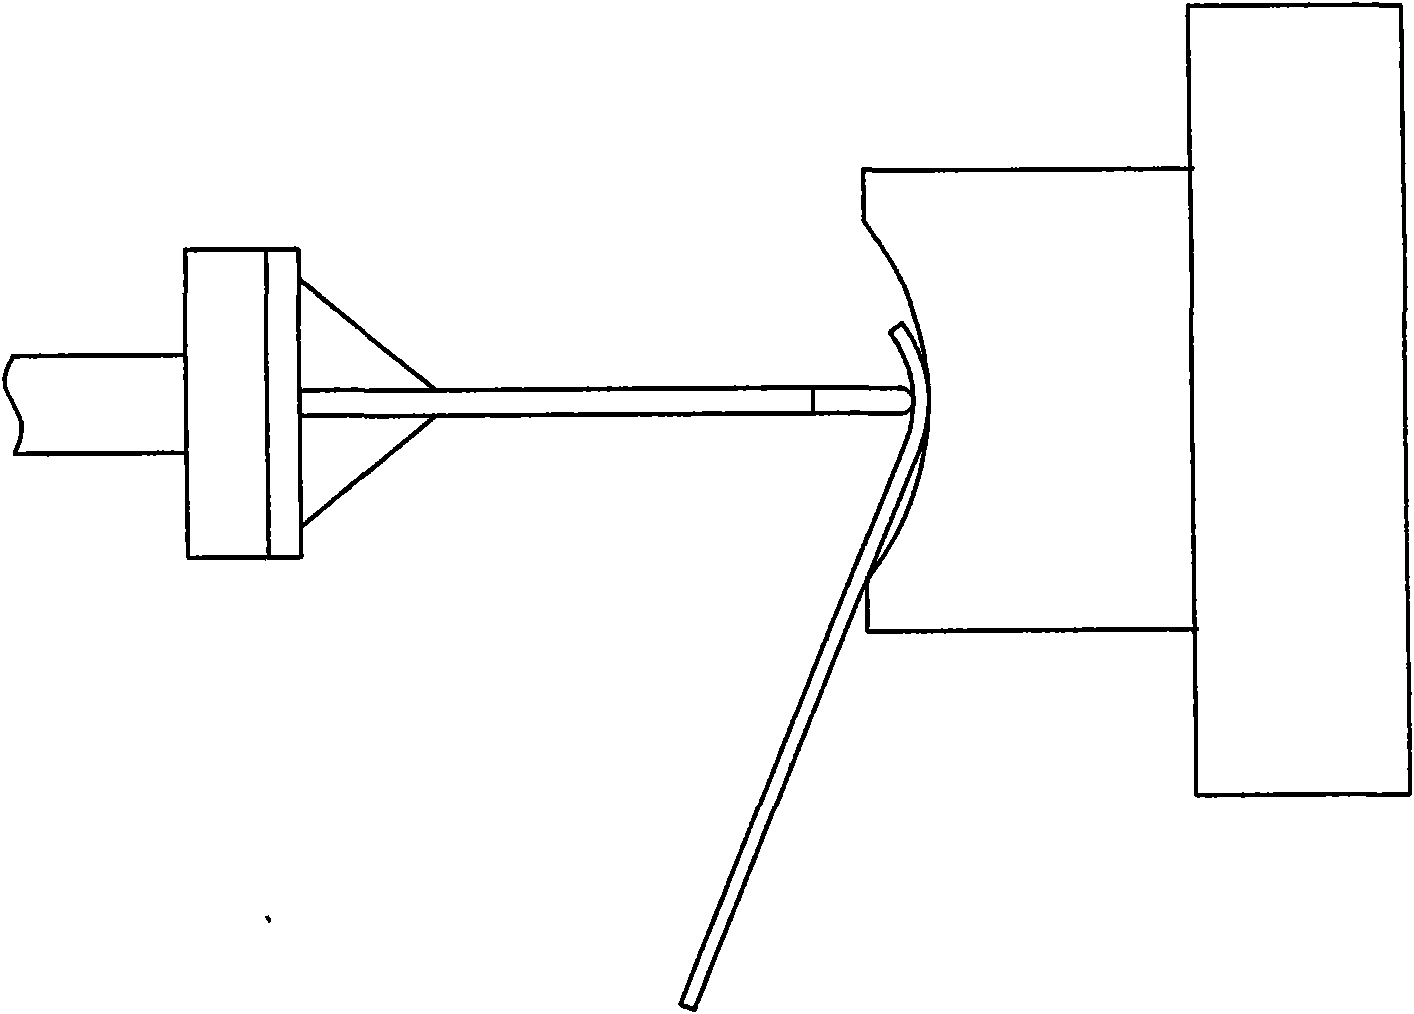 Method for pressing circular tubes by oil press